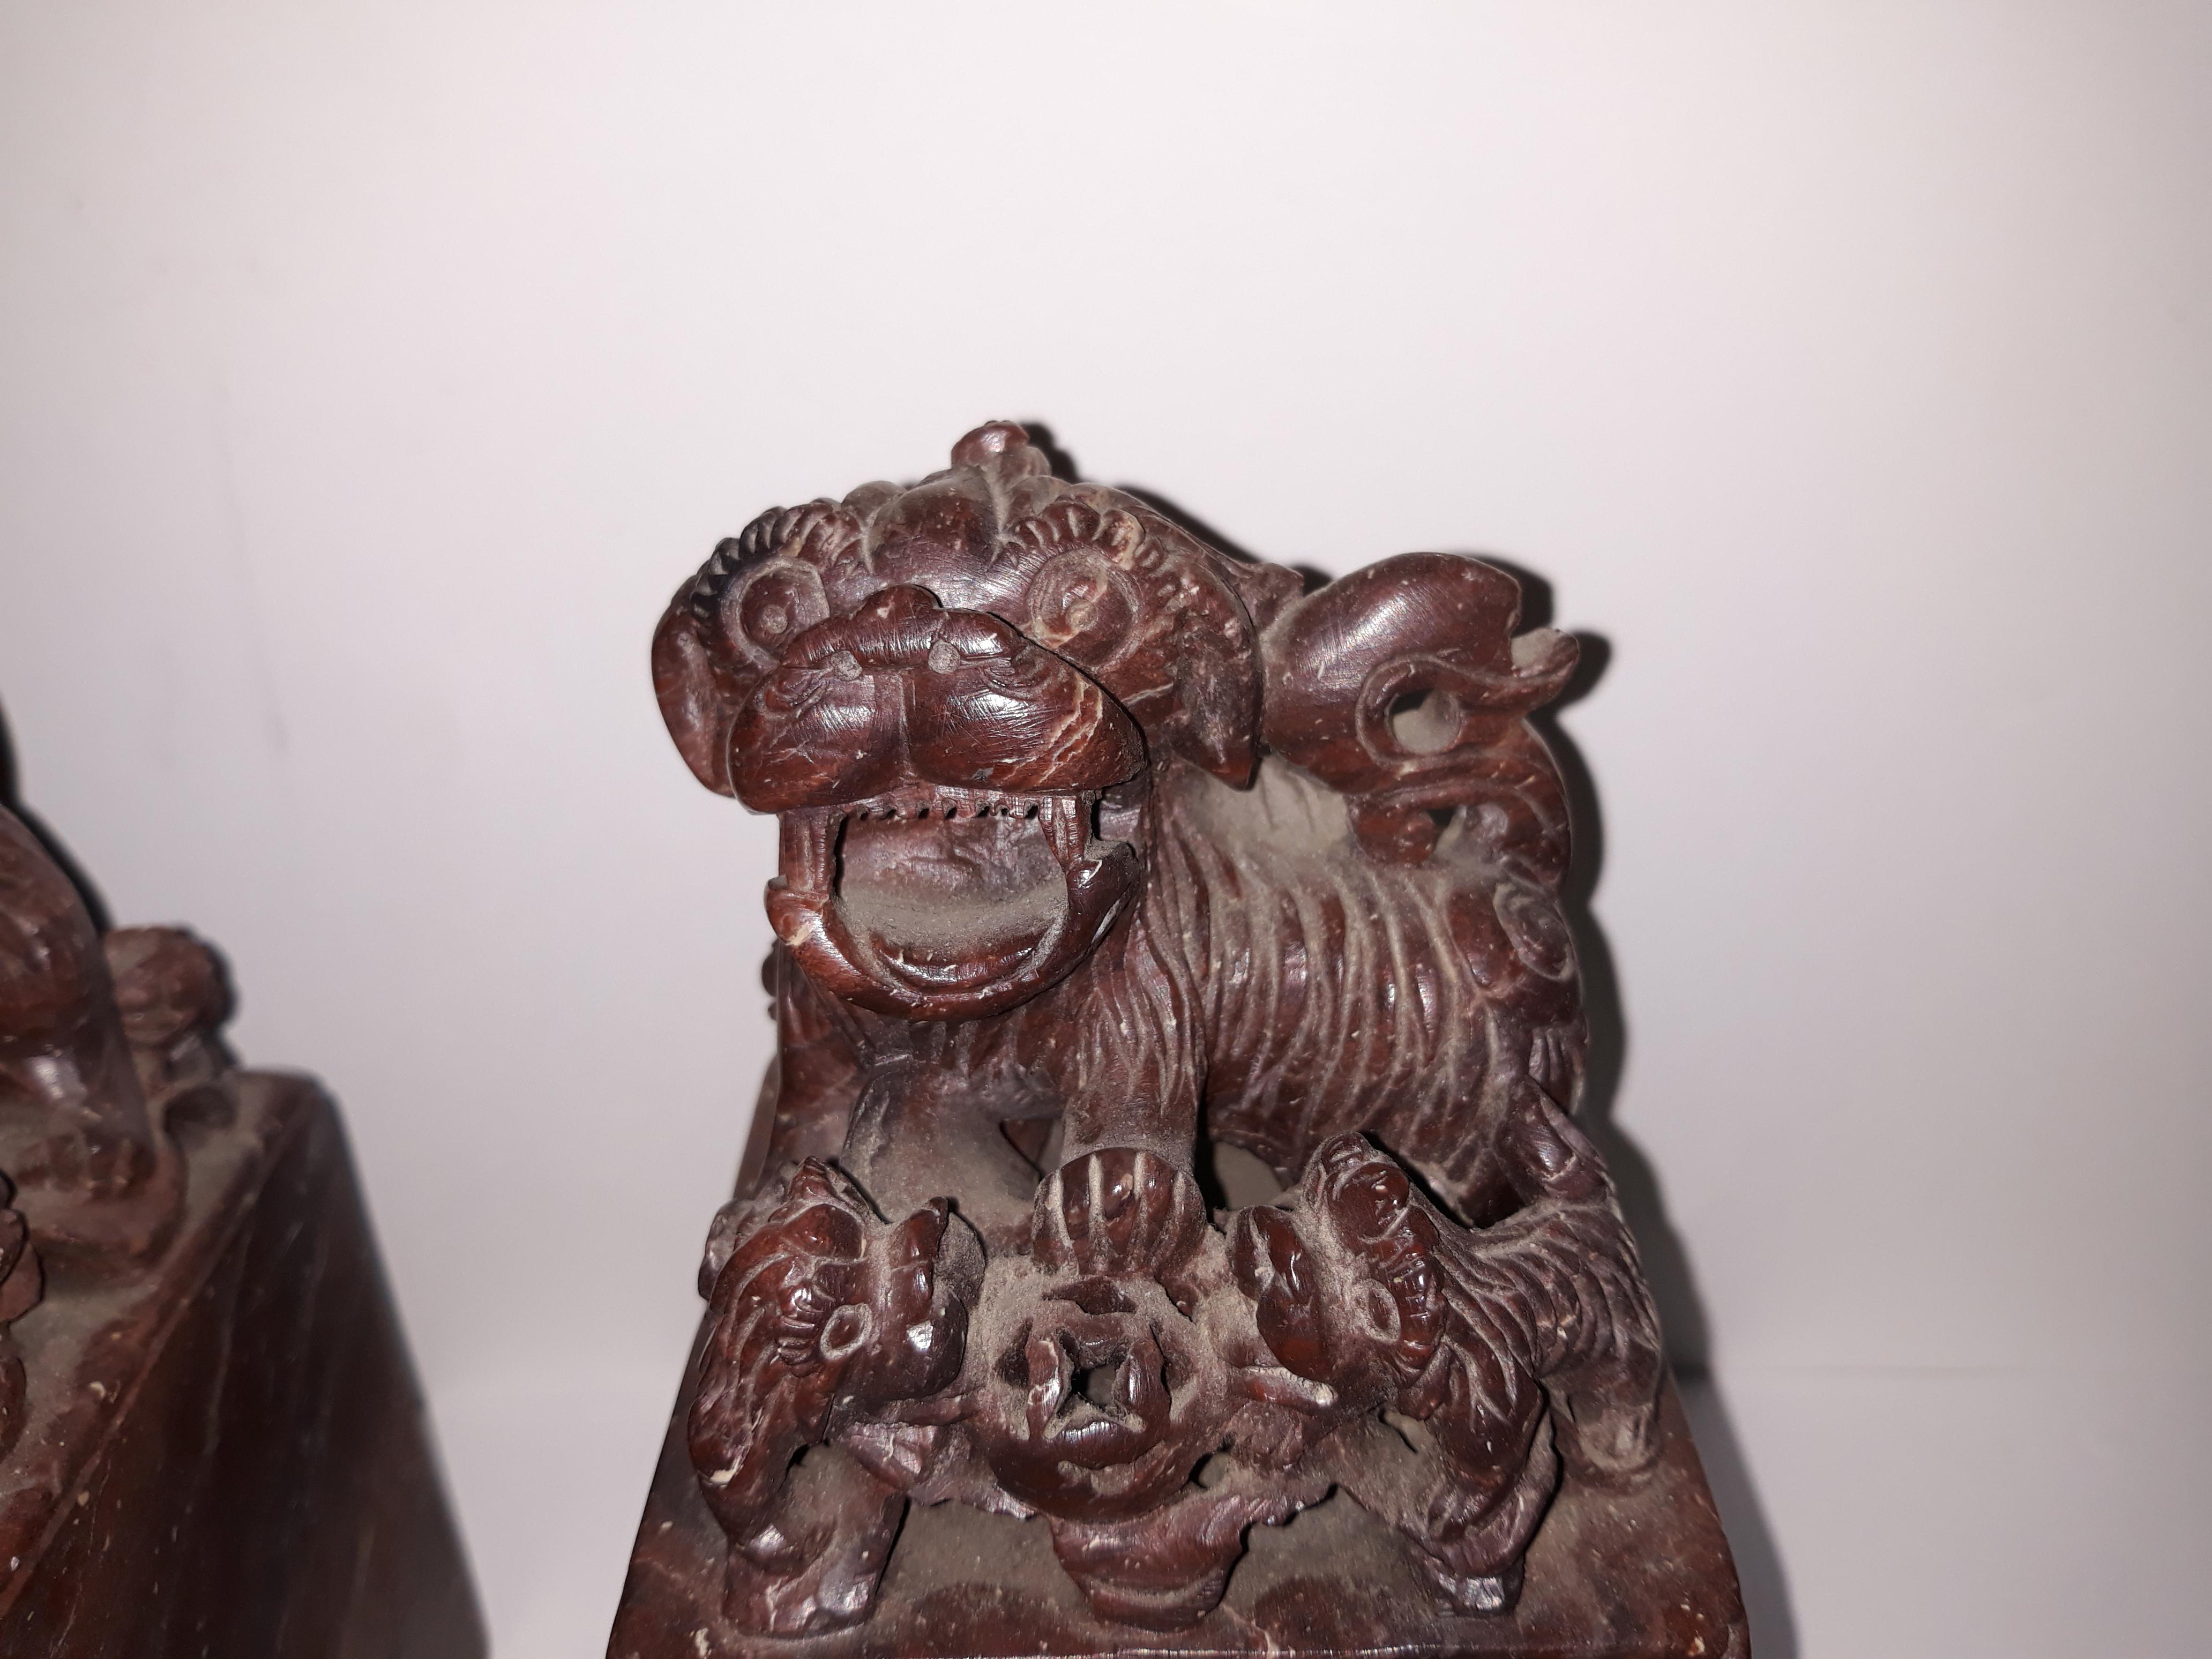 Pair of ancient Chinese bookends Cing period Emperor Puyi
Pair of right and left bookends in red marble representing dogs of fo
Period cing last emperor Puyi.
Measures: Height 18 cm, width 8cm, depth 7cm.
     